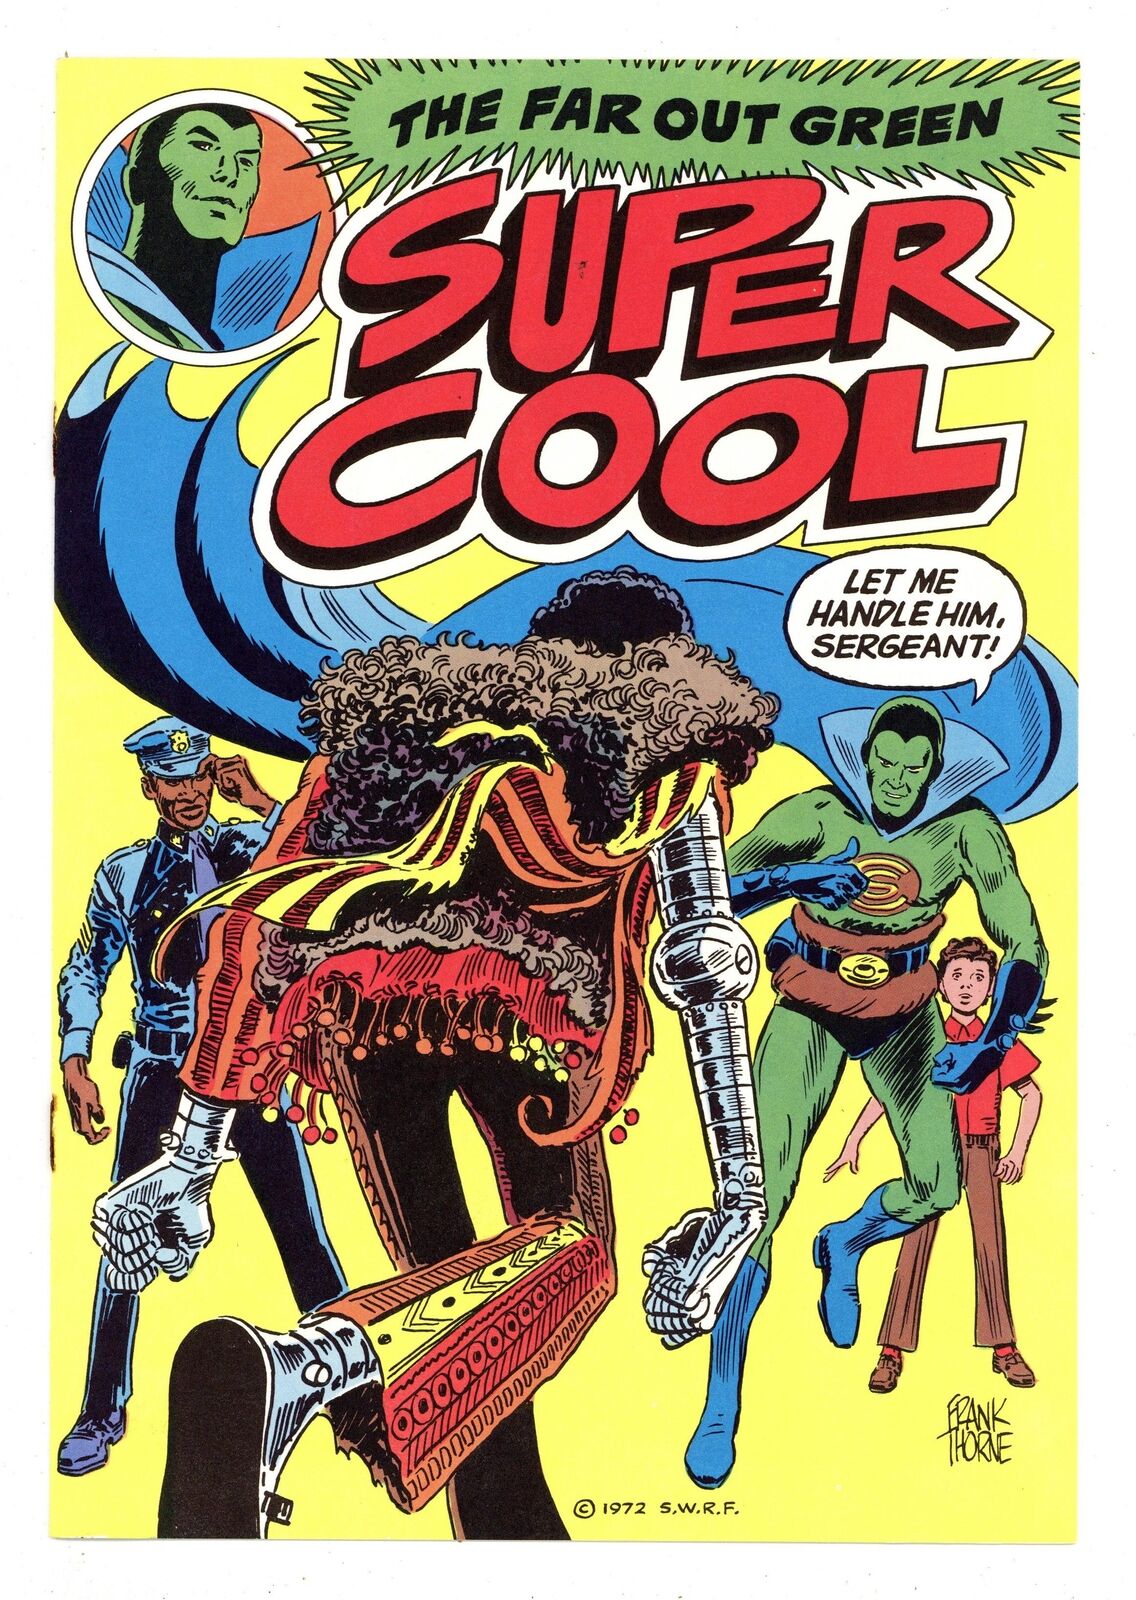 Far Out Green Super Cool #2 VG 4.0 1972